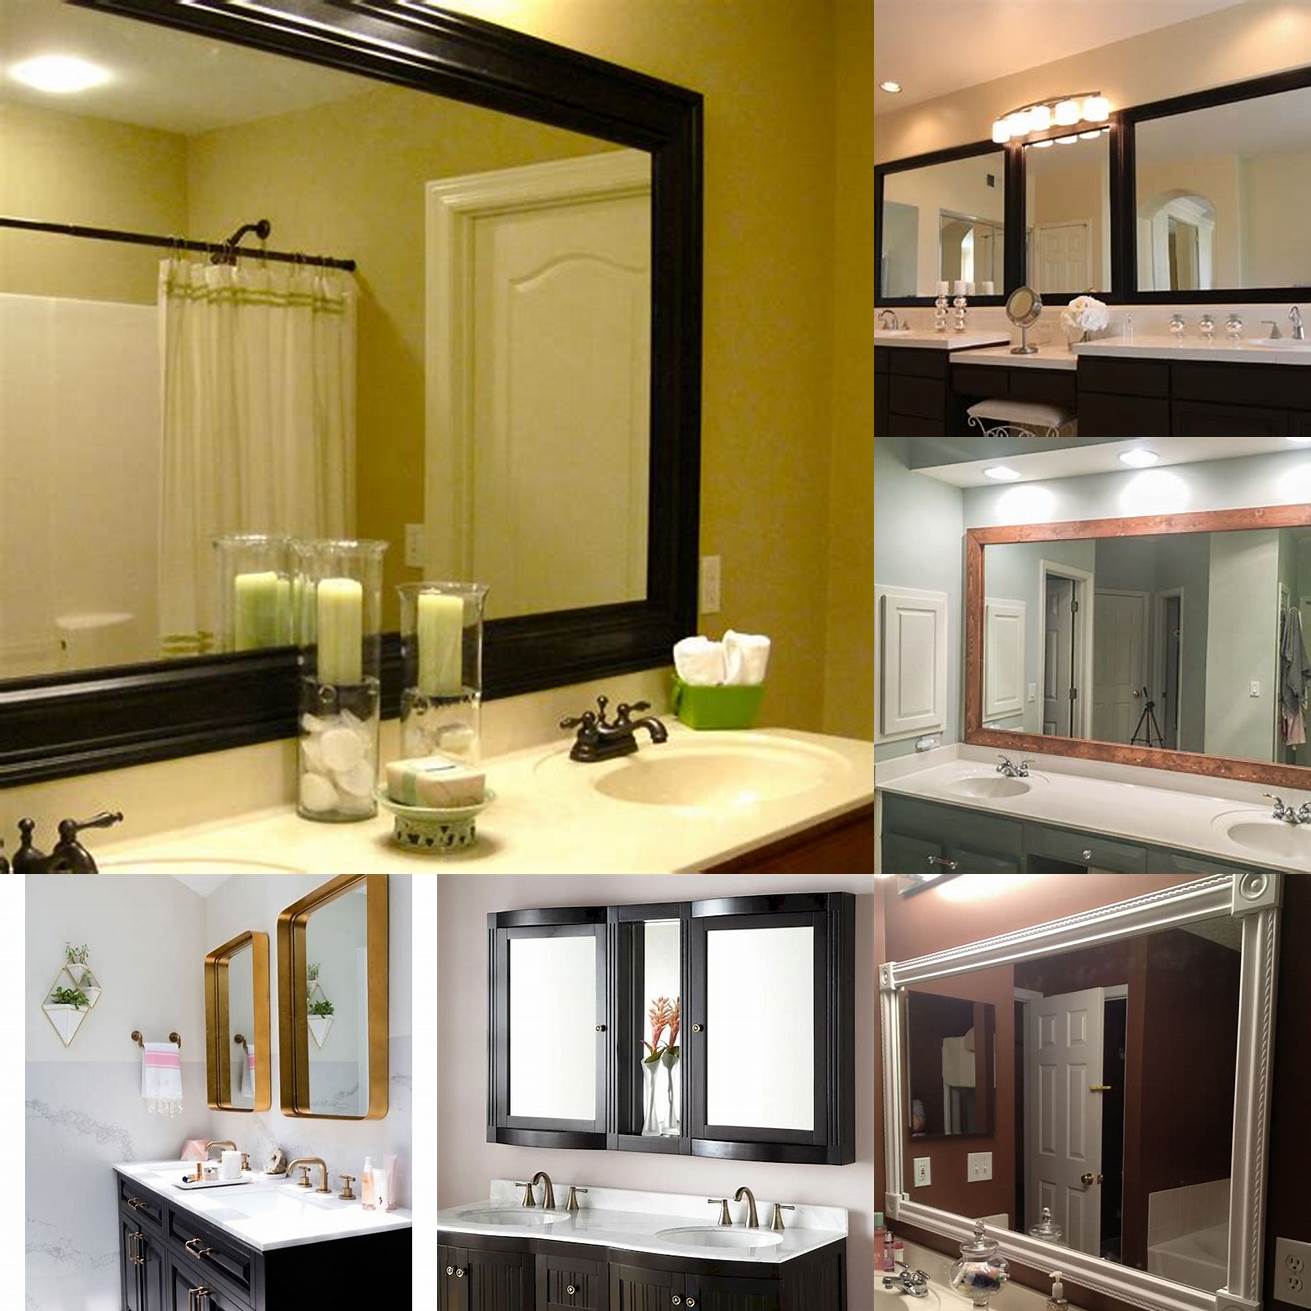 Framed mirrors add a touch of elegance and sophistication to your bathroom